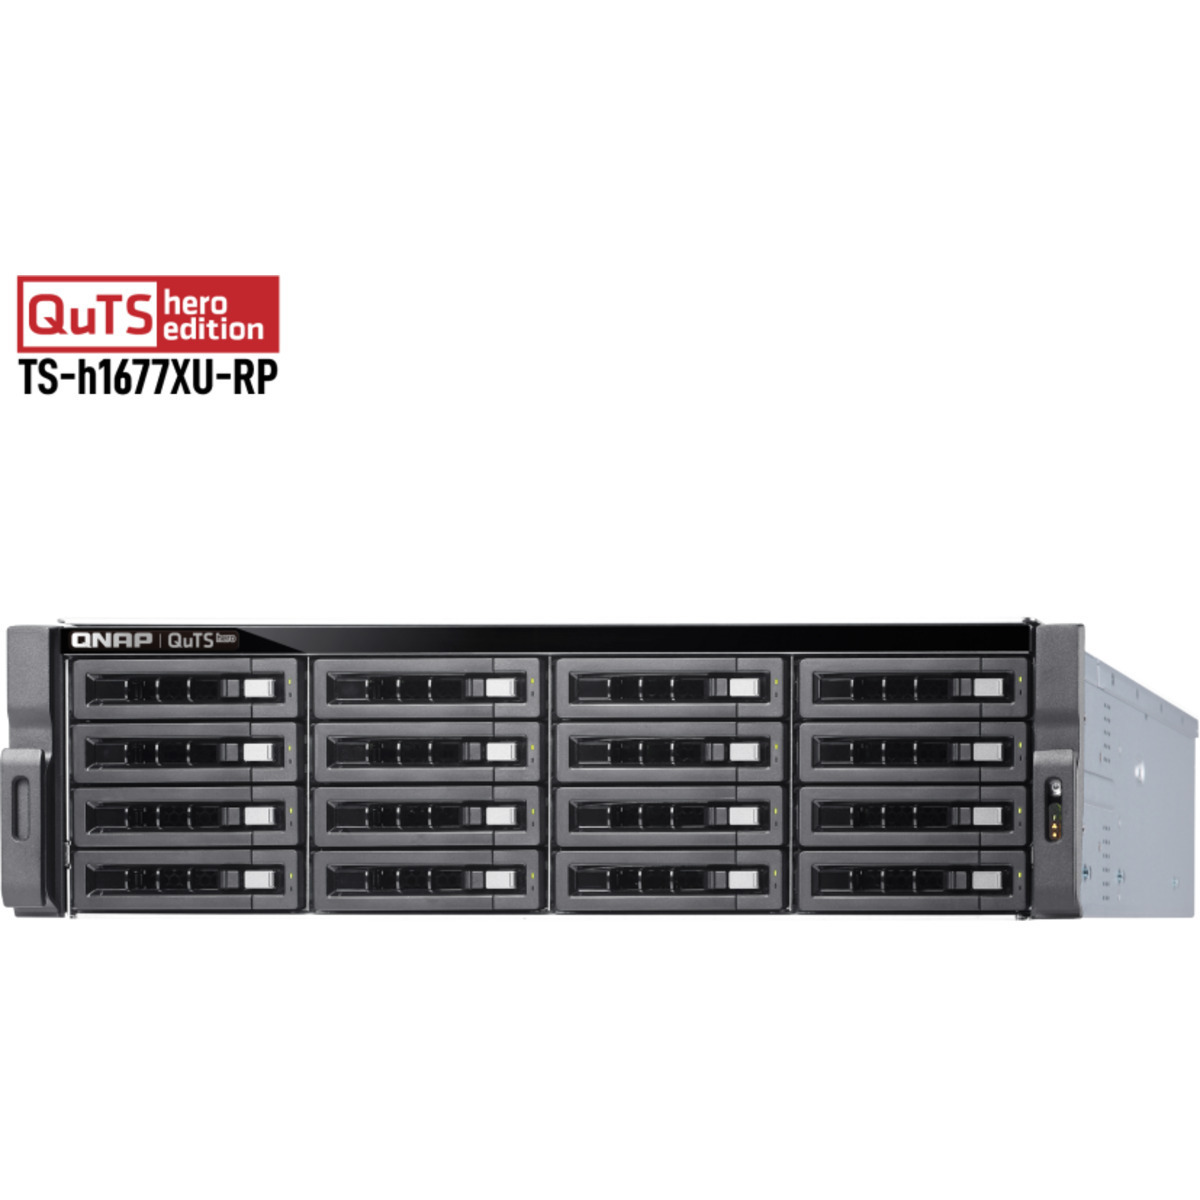 buy QNAP TS-h1677XU-RP QuTS hero Edition 352tb RackMount NAS - Network Attached Storage Device 16x22000gb Seagate IronWolf Pro ST22000NT001 3.5 7200rpm SATA 6Gb/s HDD NAS Class Drives Installed - Burn-In Tested - nas headquarters buy network attached storage server device das new raid-5 free shipping usa spring sale TS-h1677XU-RP QuTS hero Edition